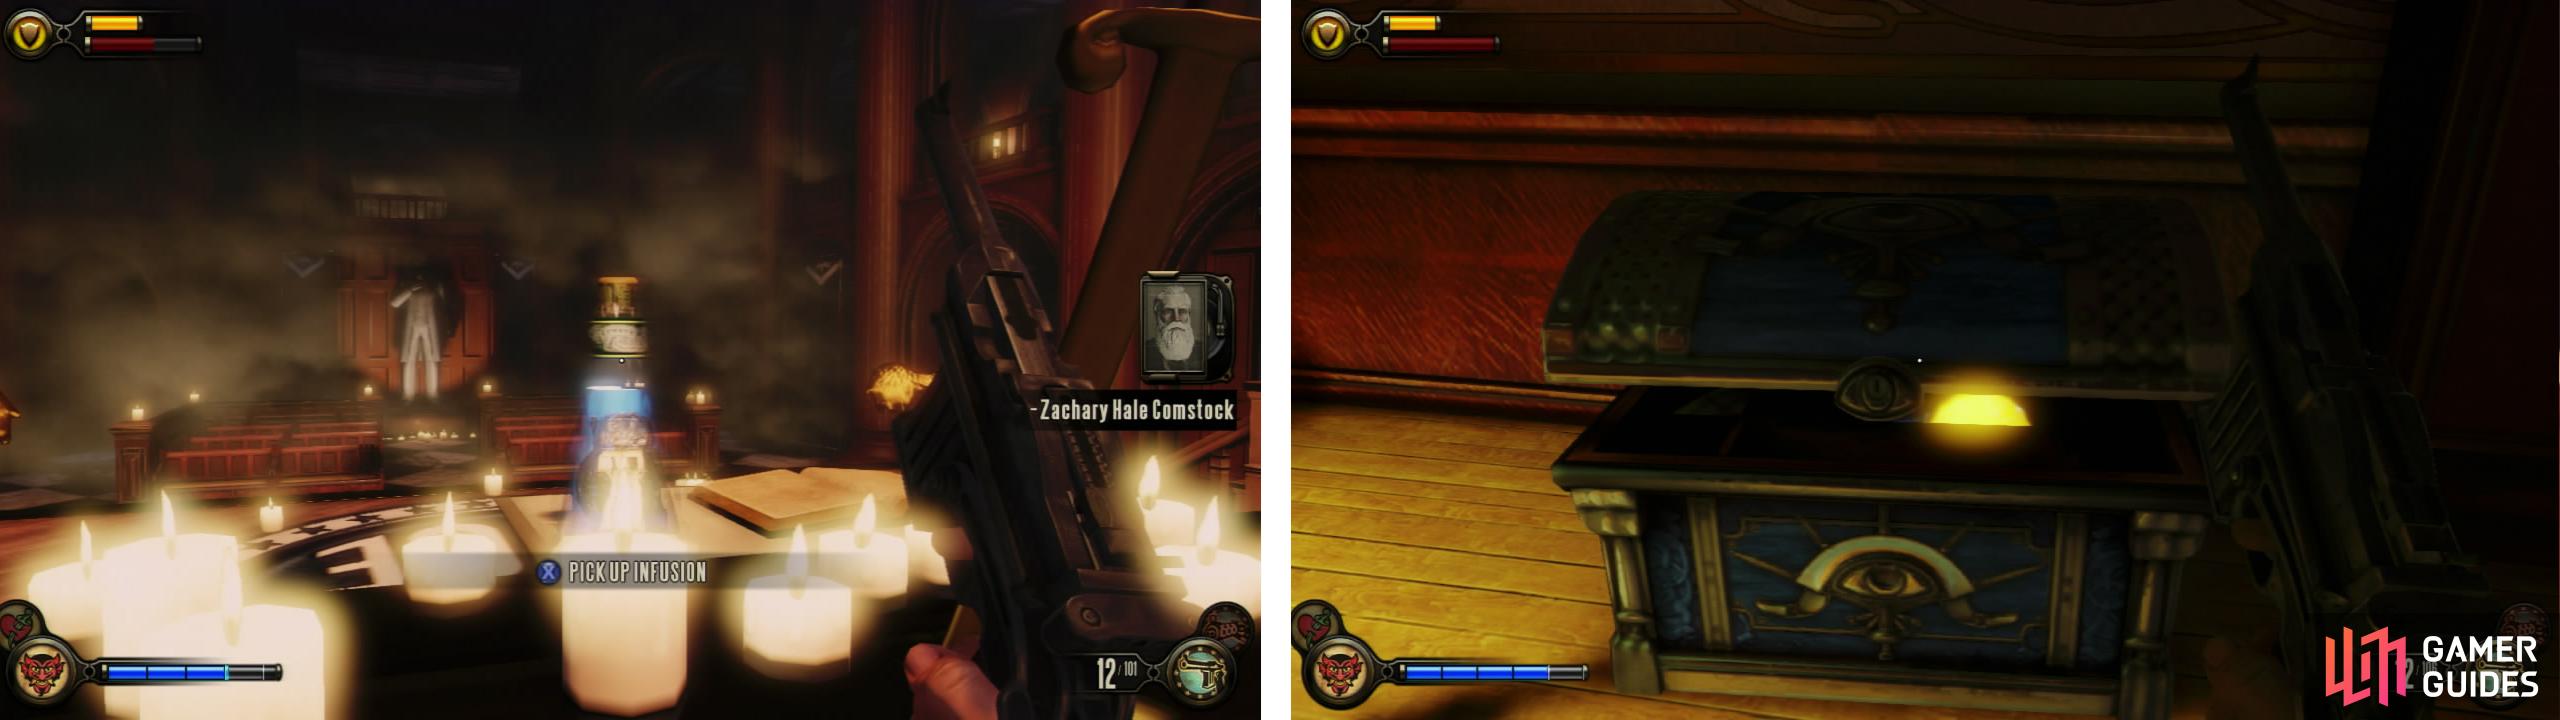 Grab the key from the altar (left), then backtrack tot he blue chest and open it for an Infusion Upgrade (right).